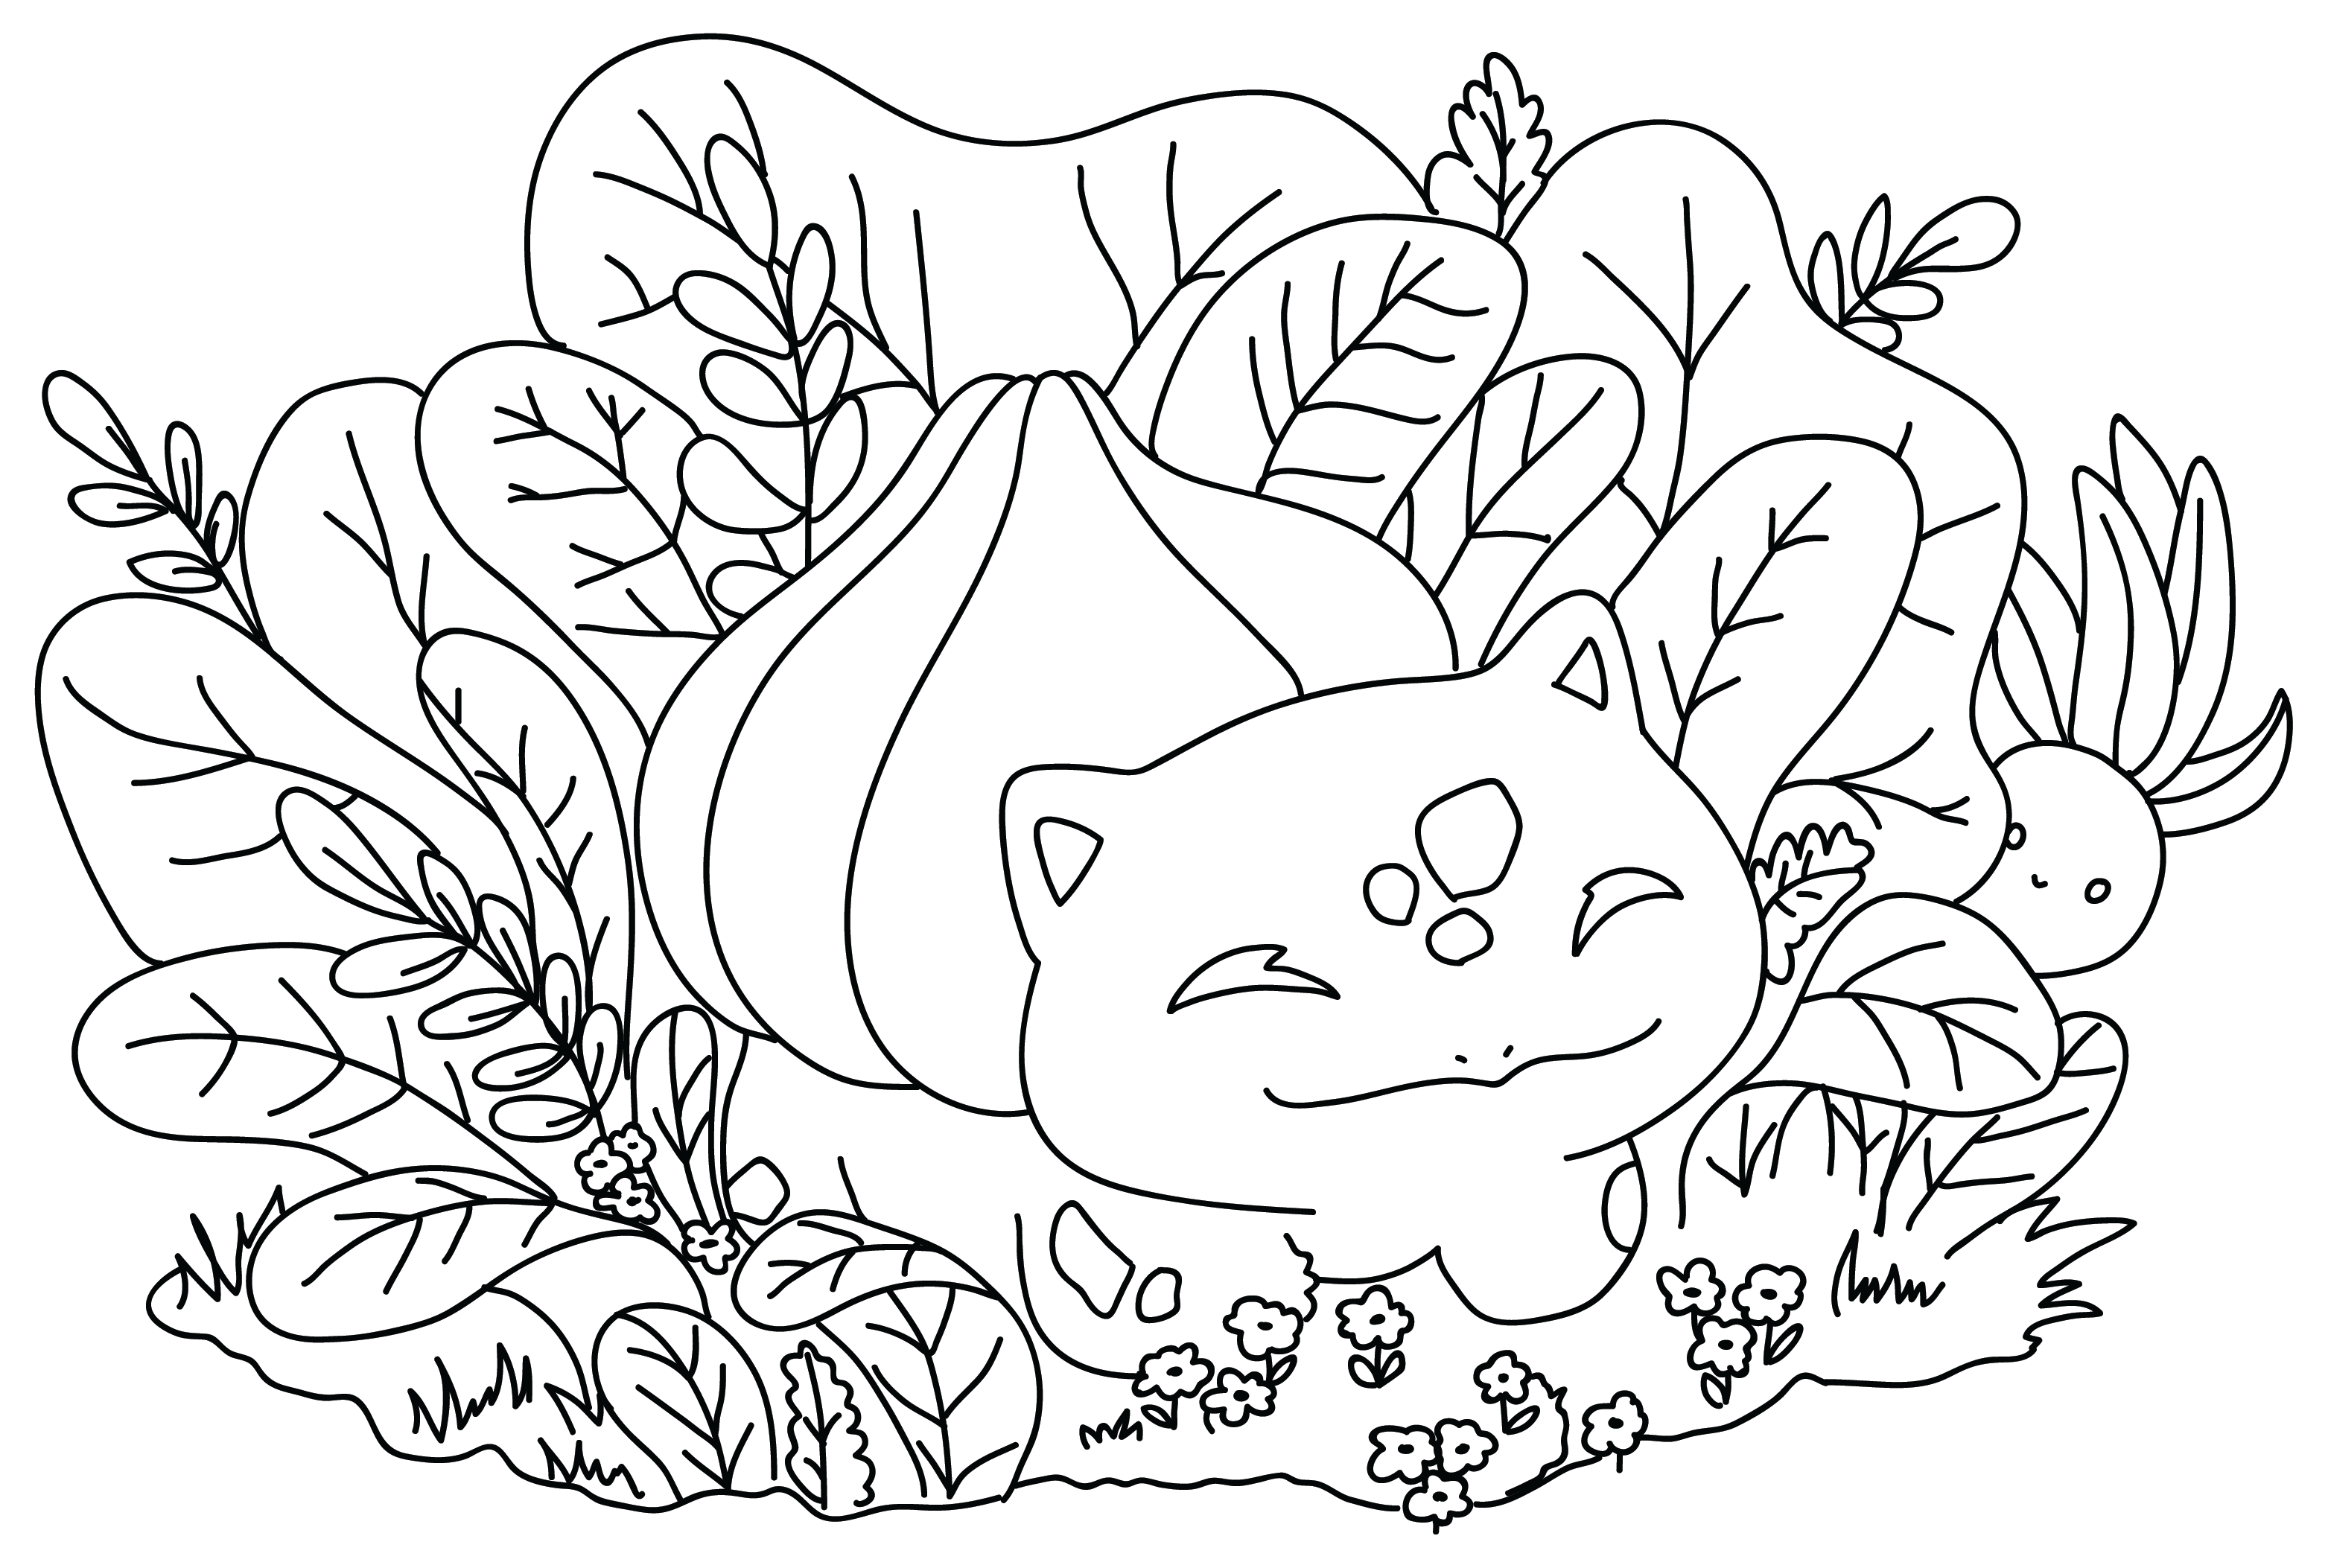 Bulbasaur Pokemon Images to Color from Bulbasaur